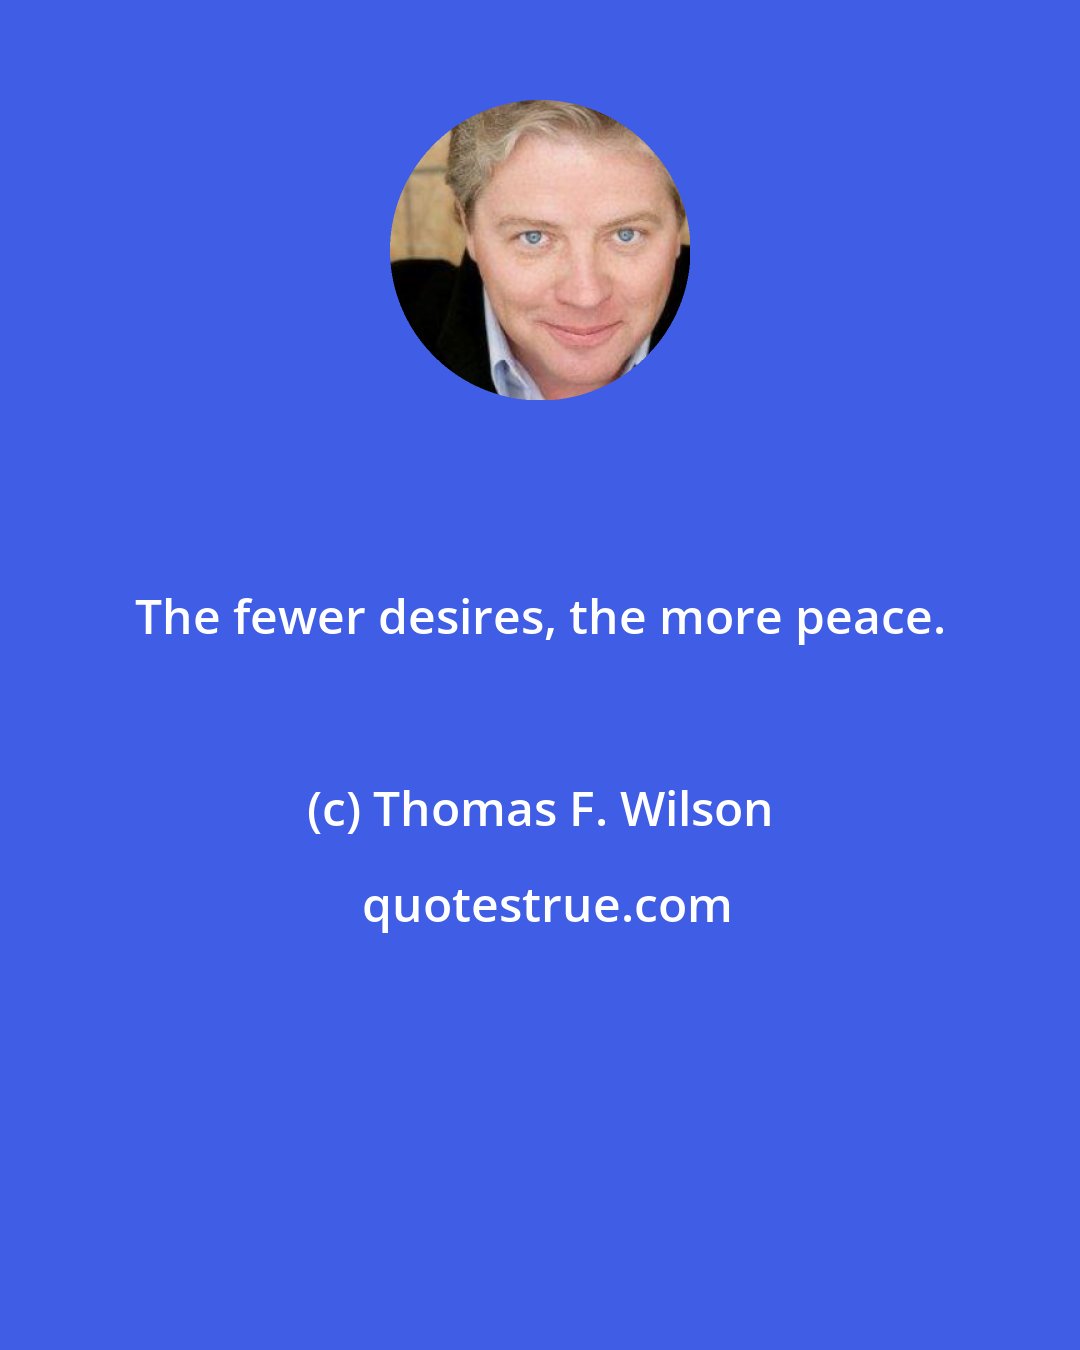 Thomas F. Wilson: The fewer desires, the more peace.